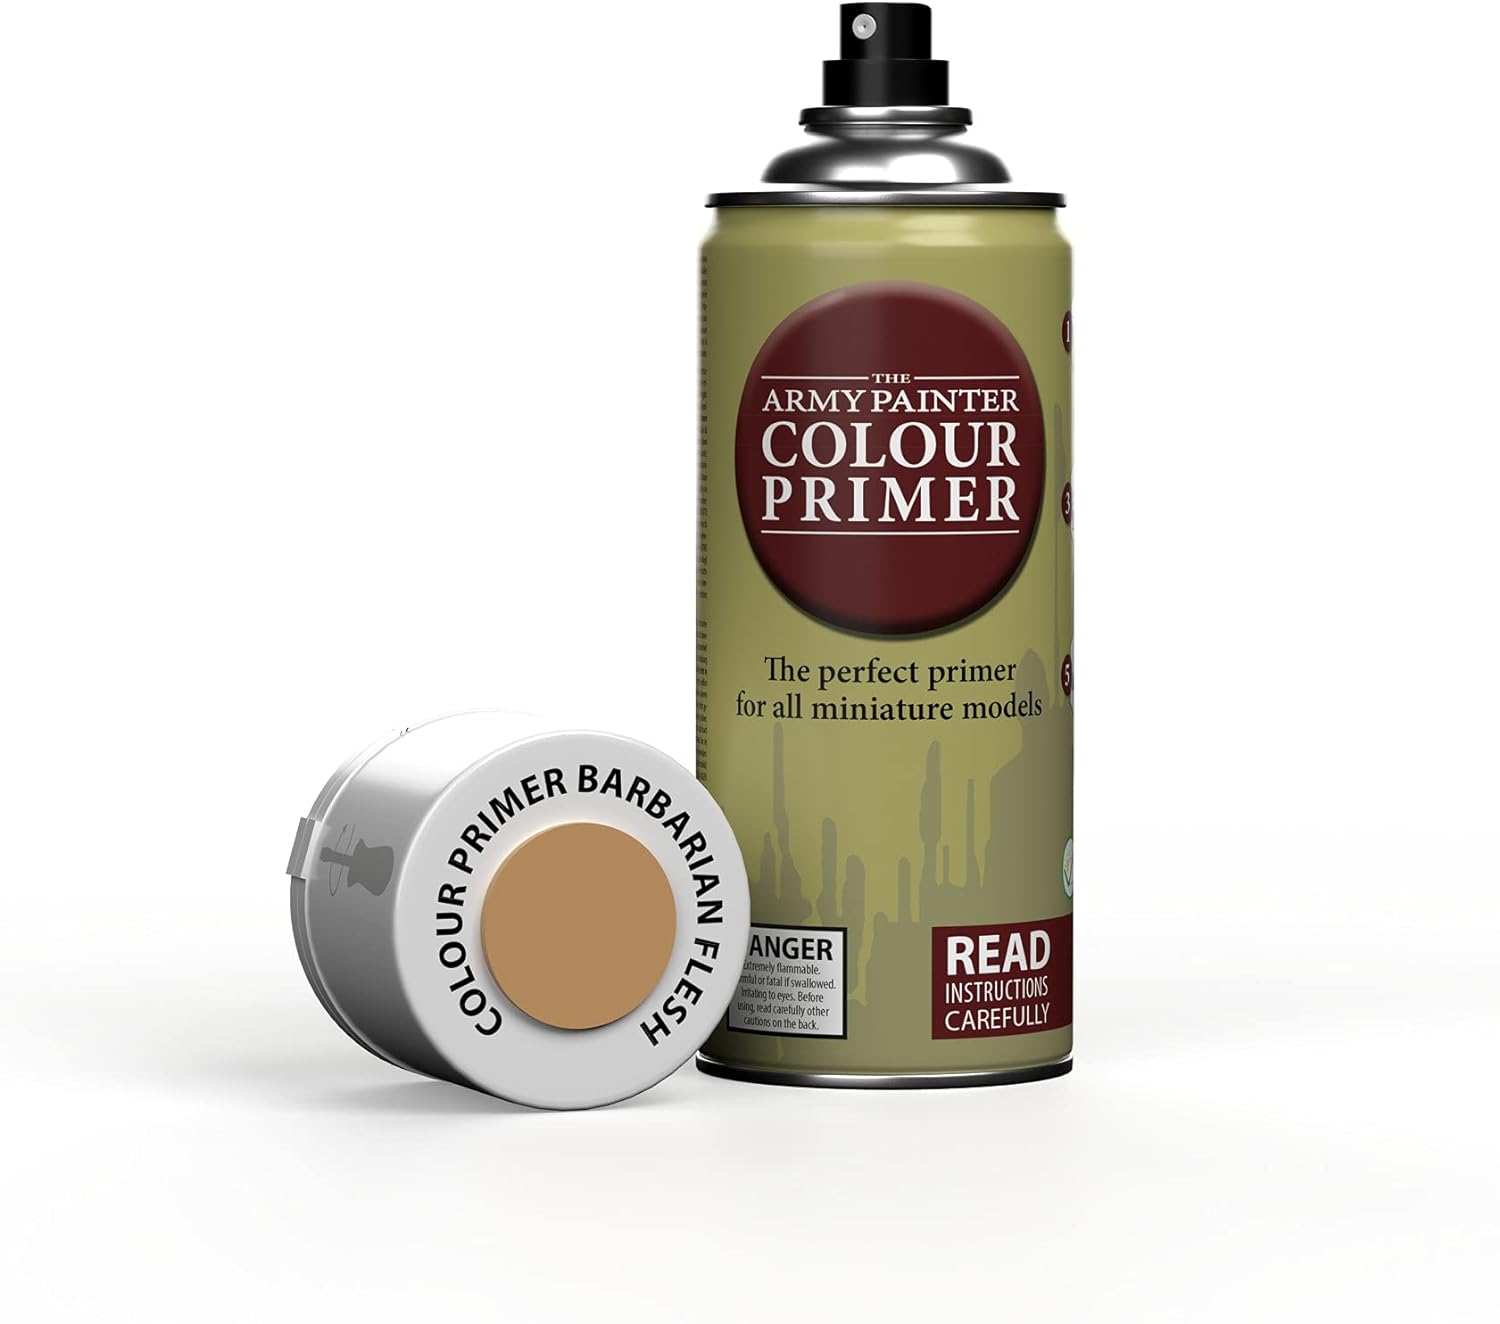 The Army Painter Color Primer Spray Paint, Leather Brown, 400ml, 13.5oz - Acrylic Spray Undercoat for Miniature Painting - Spray Primer for Plastic Miniatures